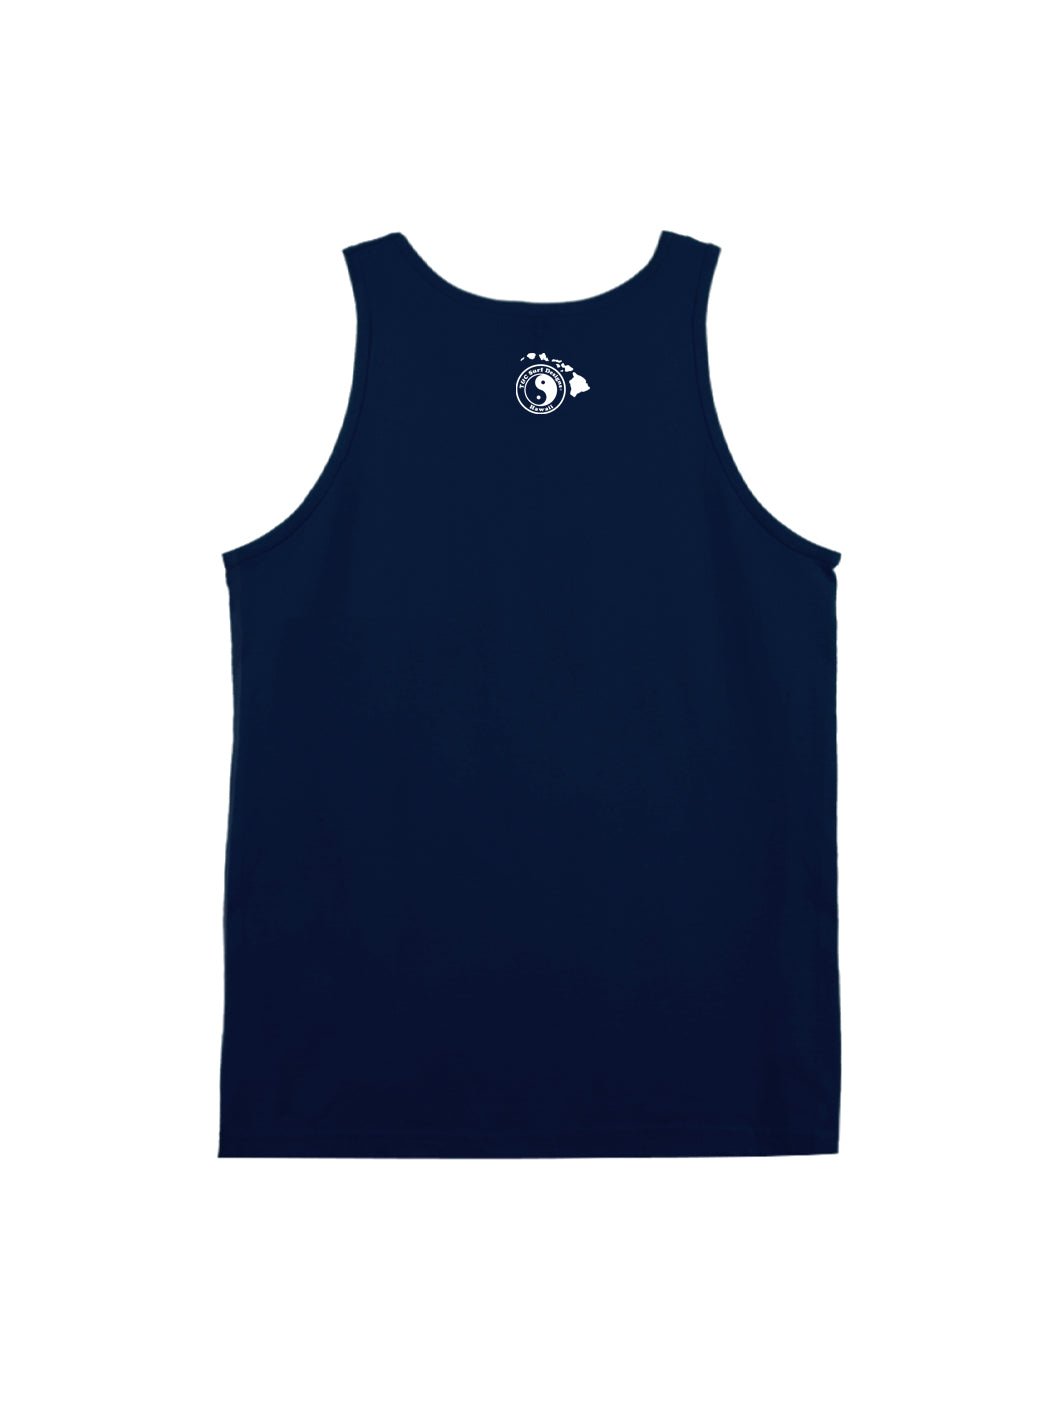 T&C Surf Designs T&C Surf Stay Stoked Tank, 